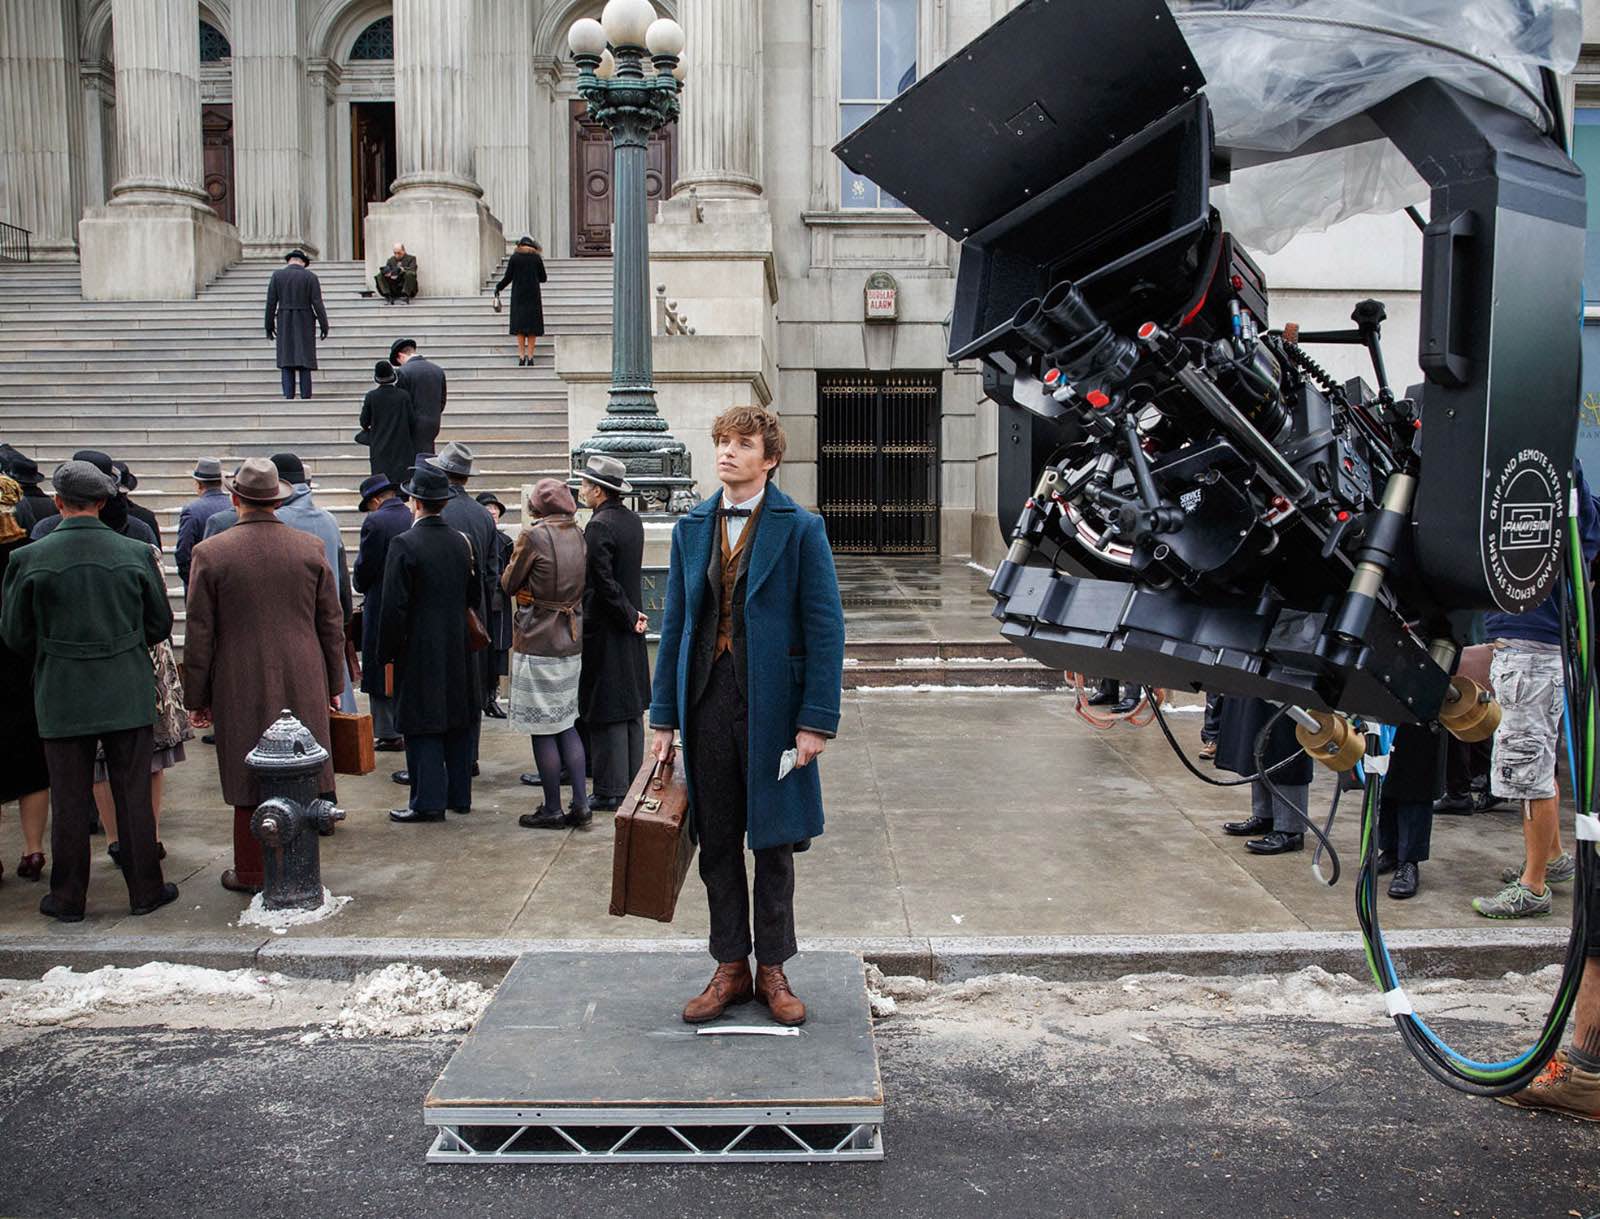 Eddie Redmayne on the set of Fantastic Beasts and Where to Find Them (2016)